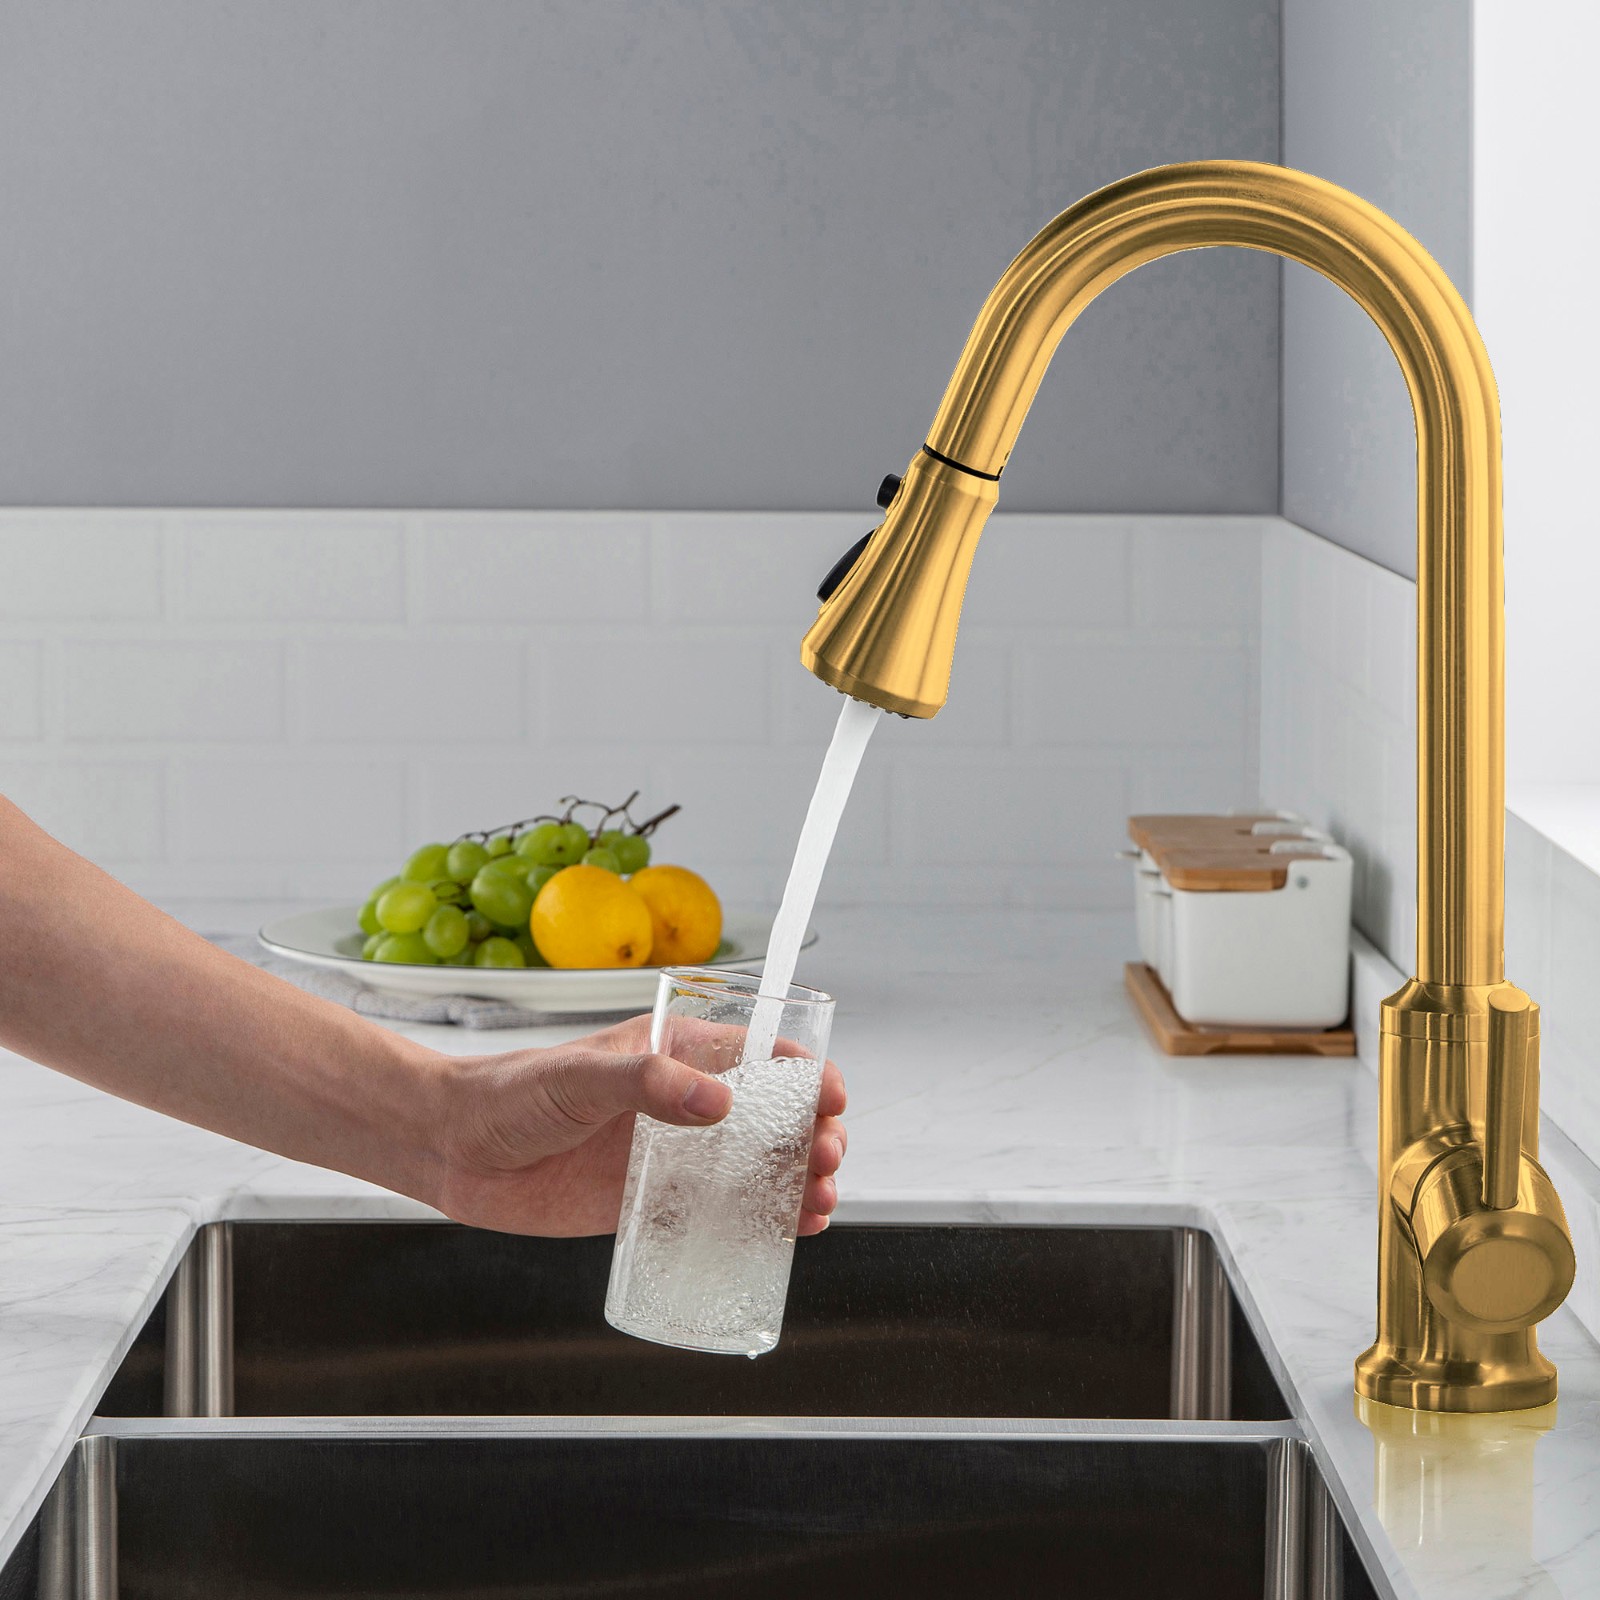  WOODBRIDGE WK101201BG Stainless Steel Single Handle Pull Down Kitchen Faucet in Brushed Gold Finish._4983